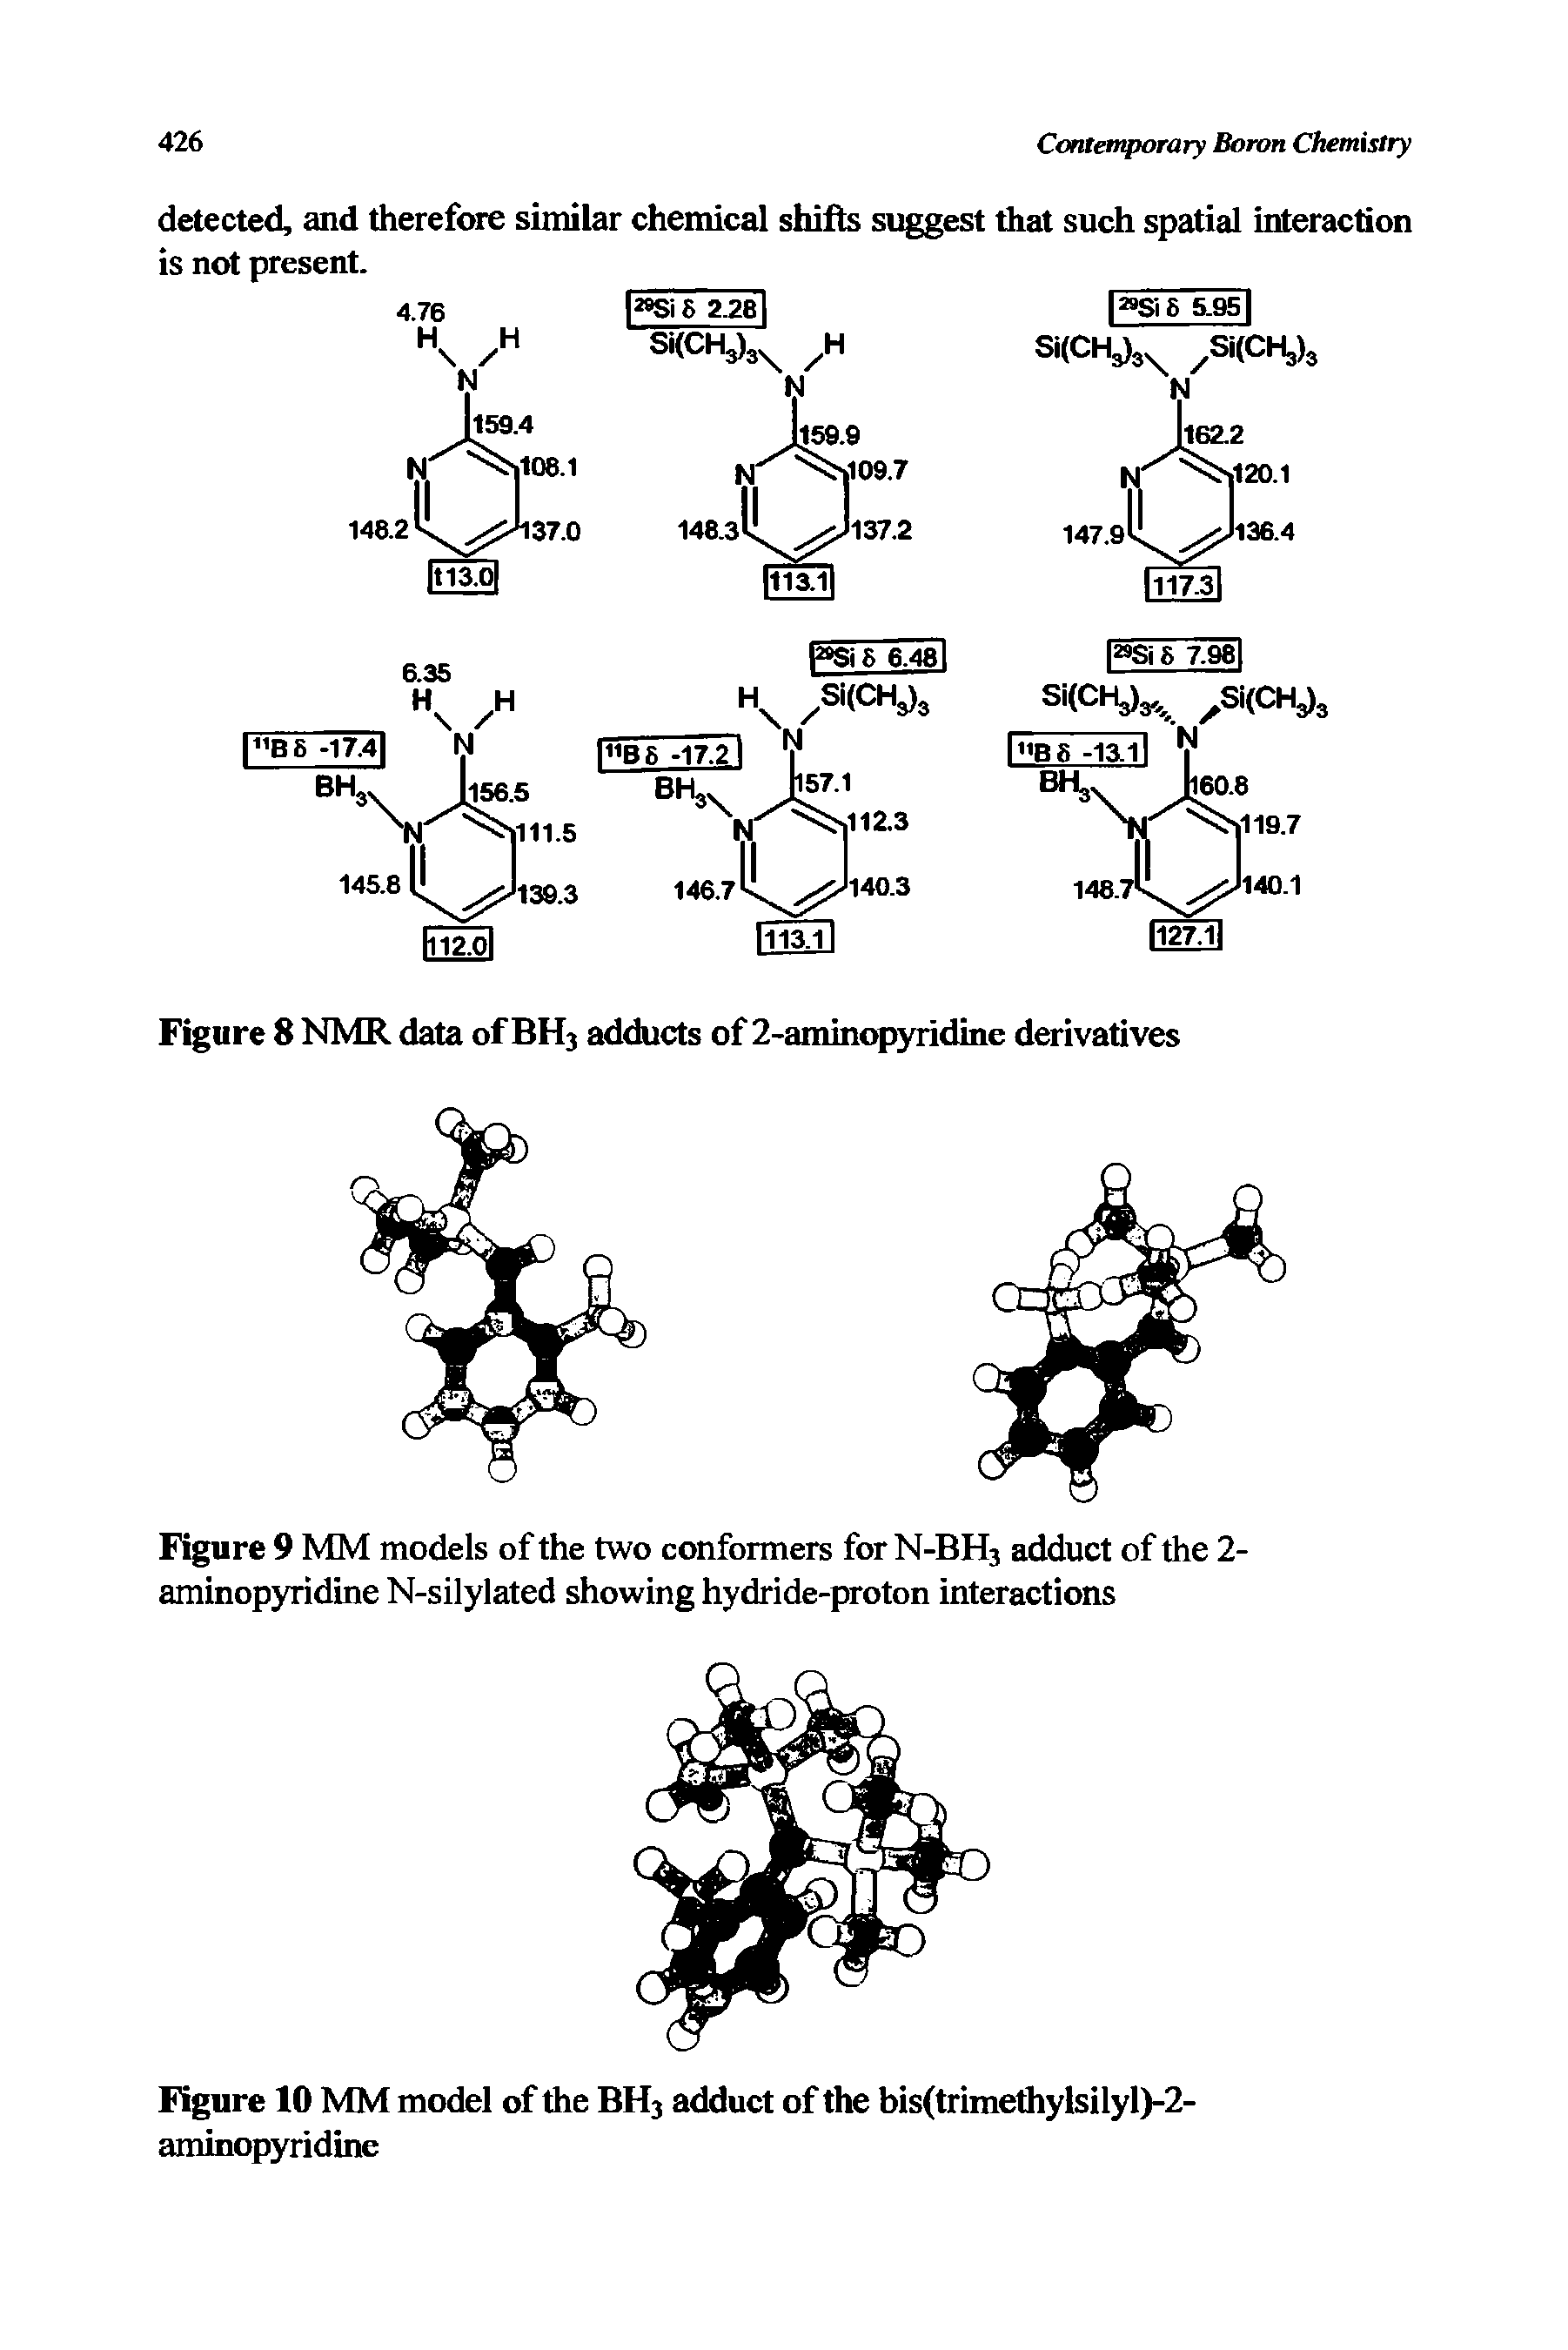 Figure 9 MM models of the two conformers for N-BH3 adduct of the 2-aminopyridine N-silylated showing hydride-proton interactions...